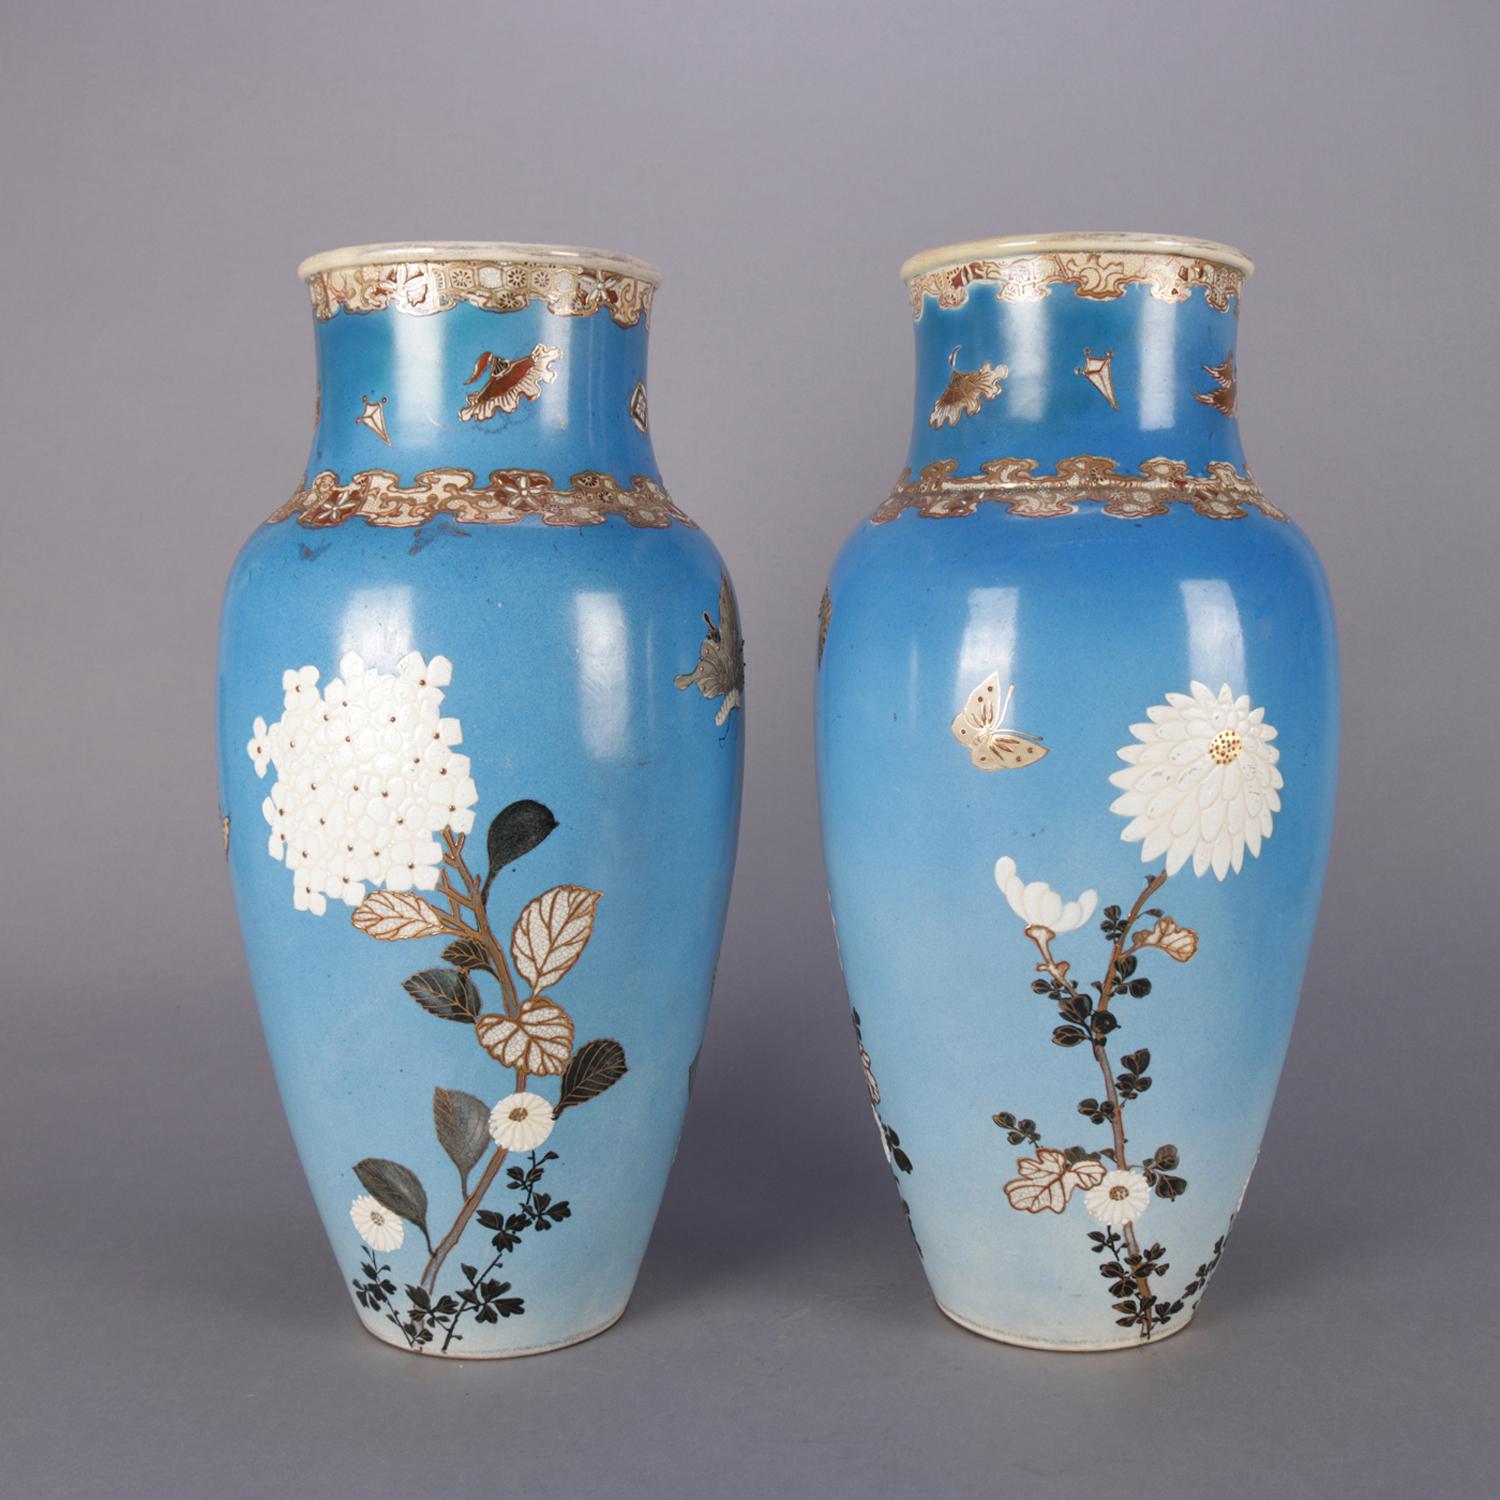 Pair of antique Japanese Satsuma arat pottery floor vases feature hand painted and gilt floral decoration on blue ground with stylized floral gilt collars, circa 1900

Measures: 19